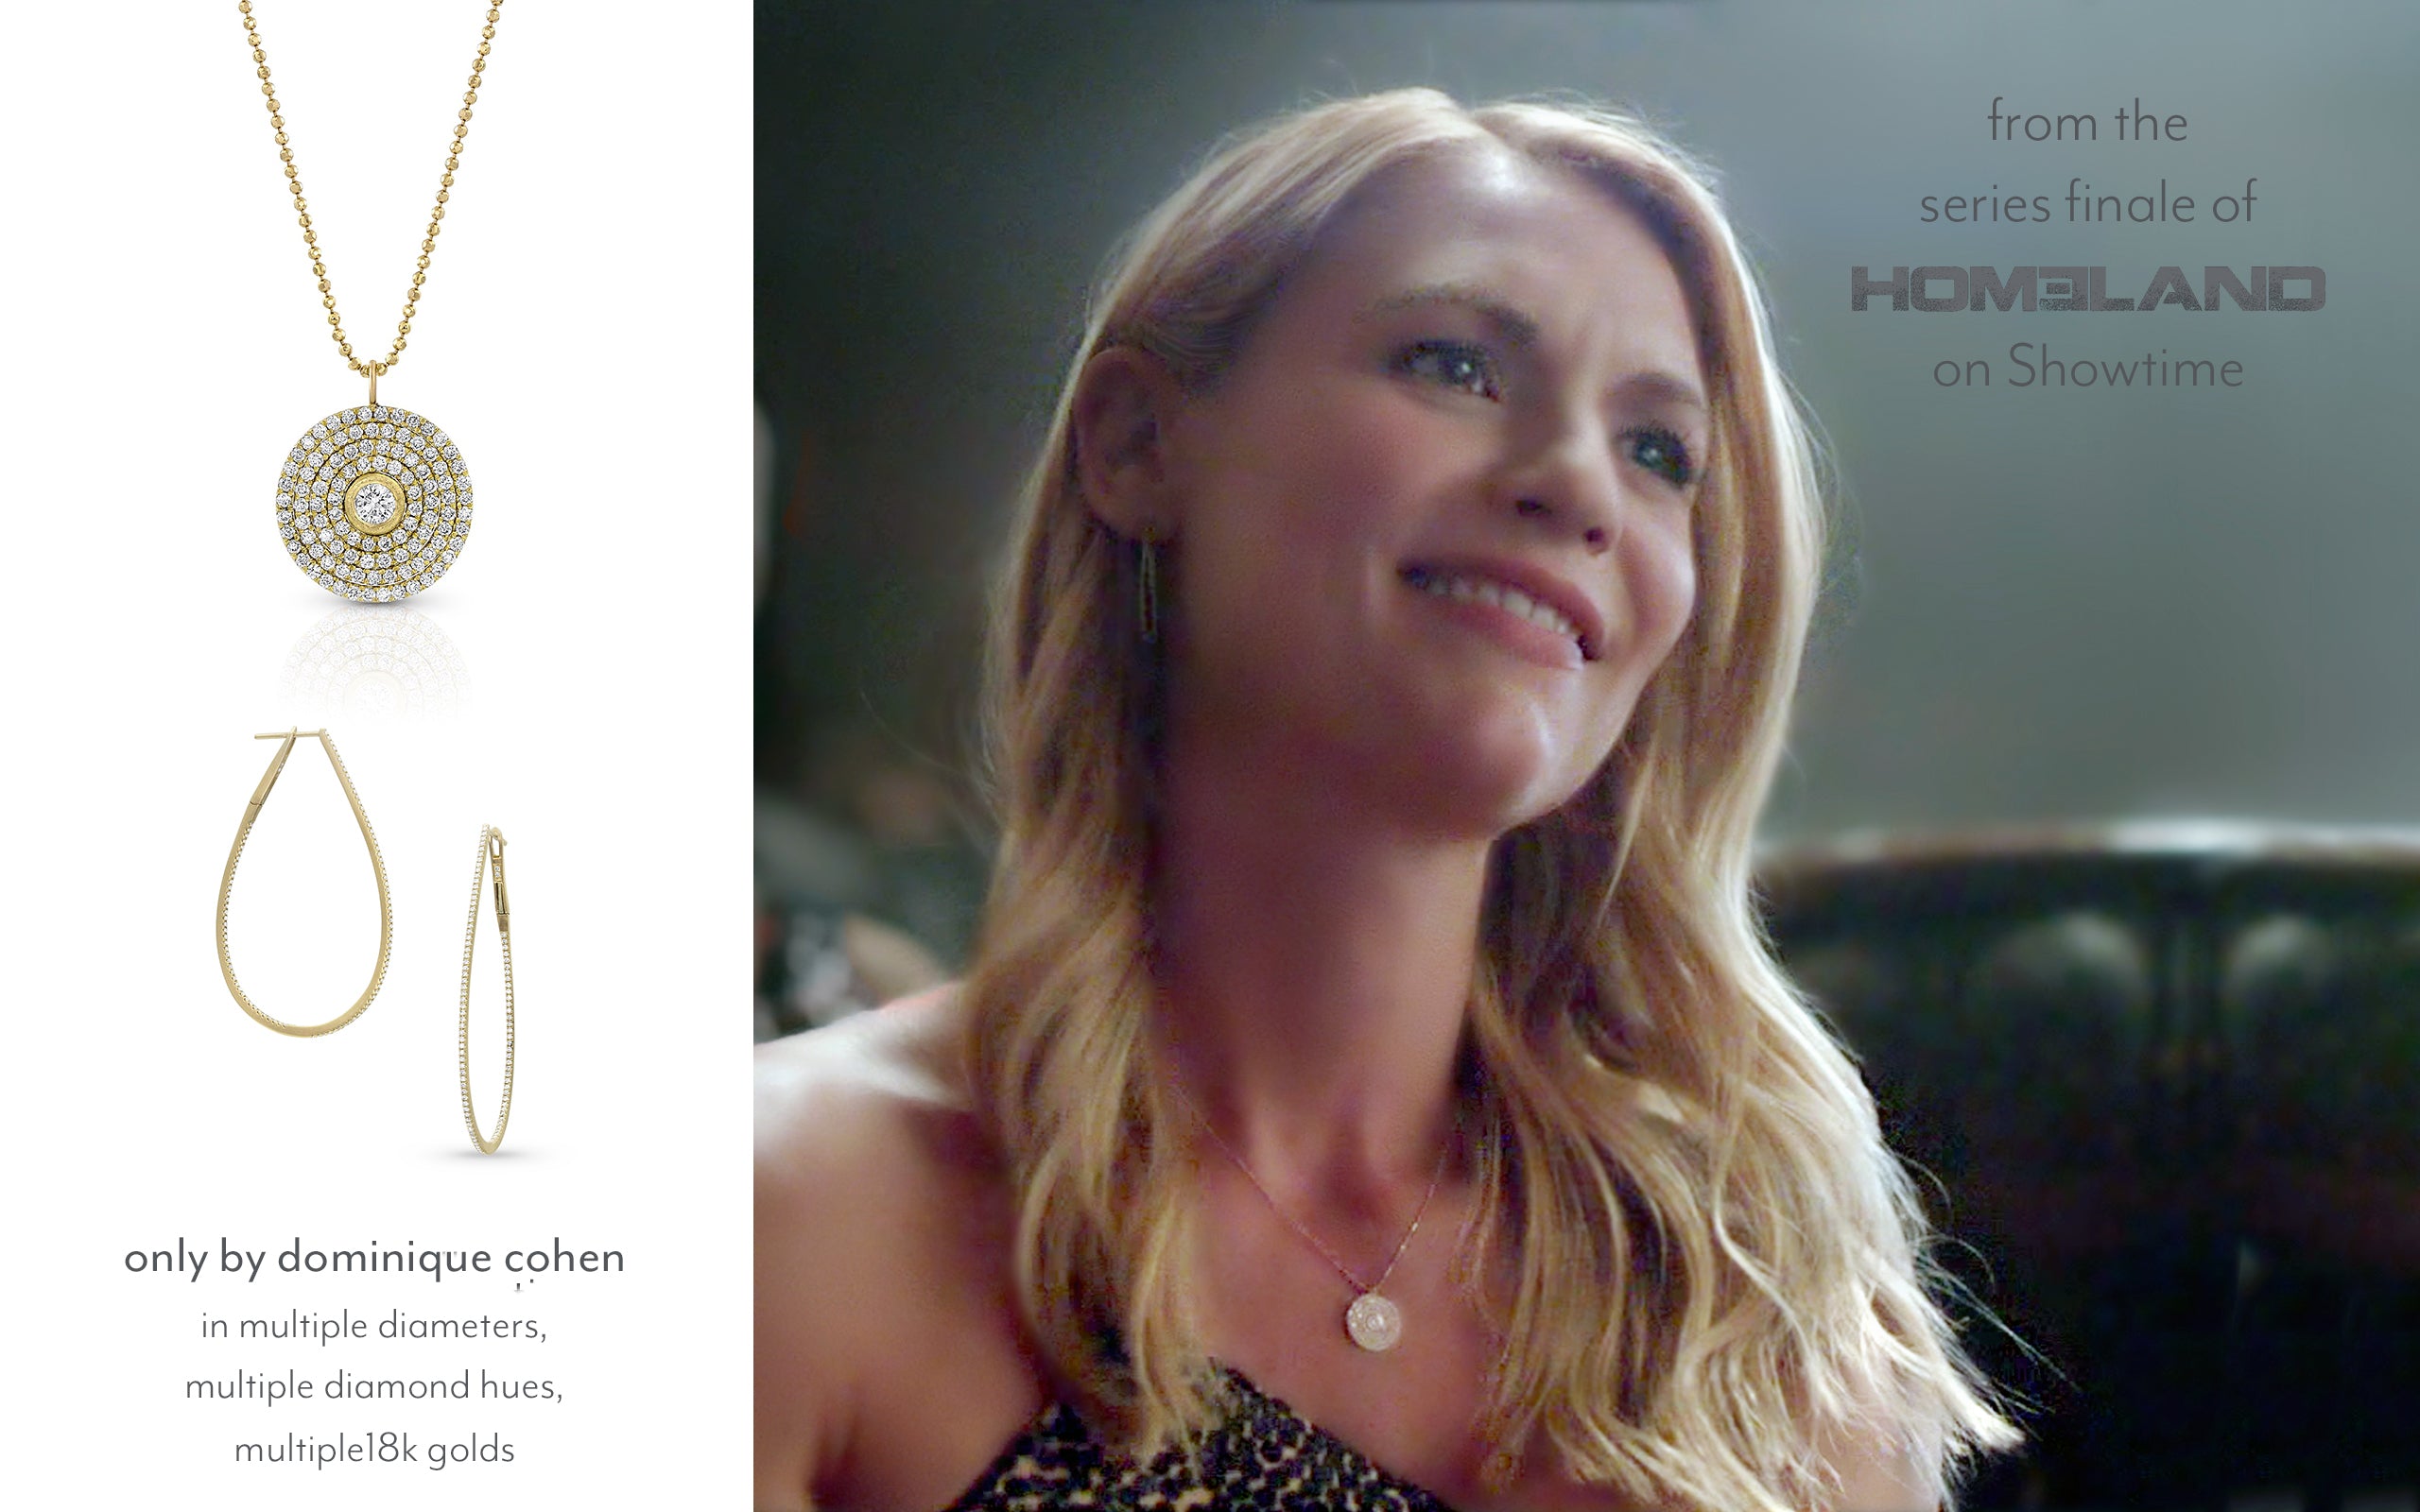 From Homeland on Showtime: Claire Danes wearing our Carrie pendant necklace; call our Beverly Hills store at 323-404-2959 if you need shopping assistance.